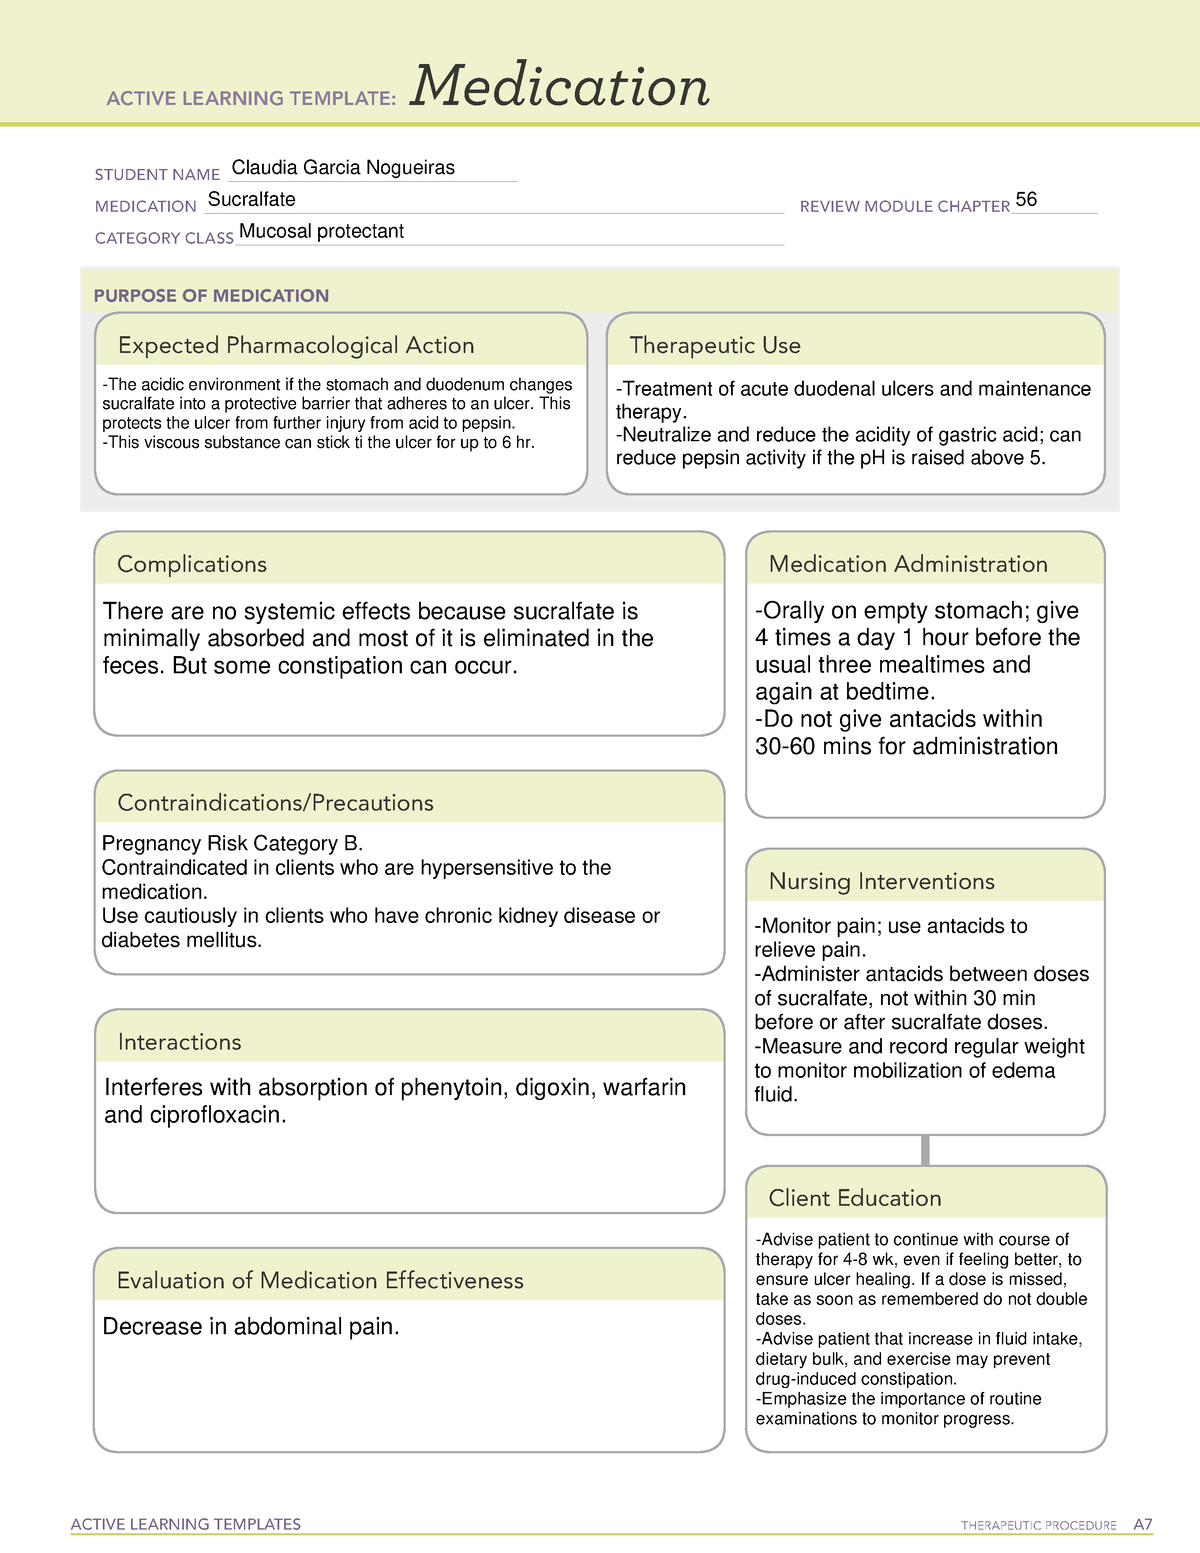 Mucosal protectant Medication templates: GI meds ACTIVE LEARNING